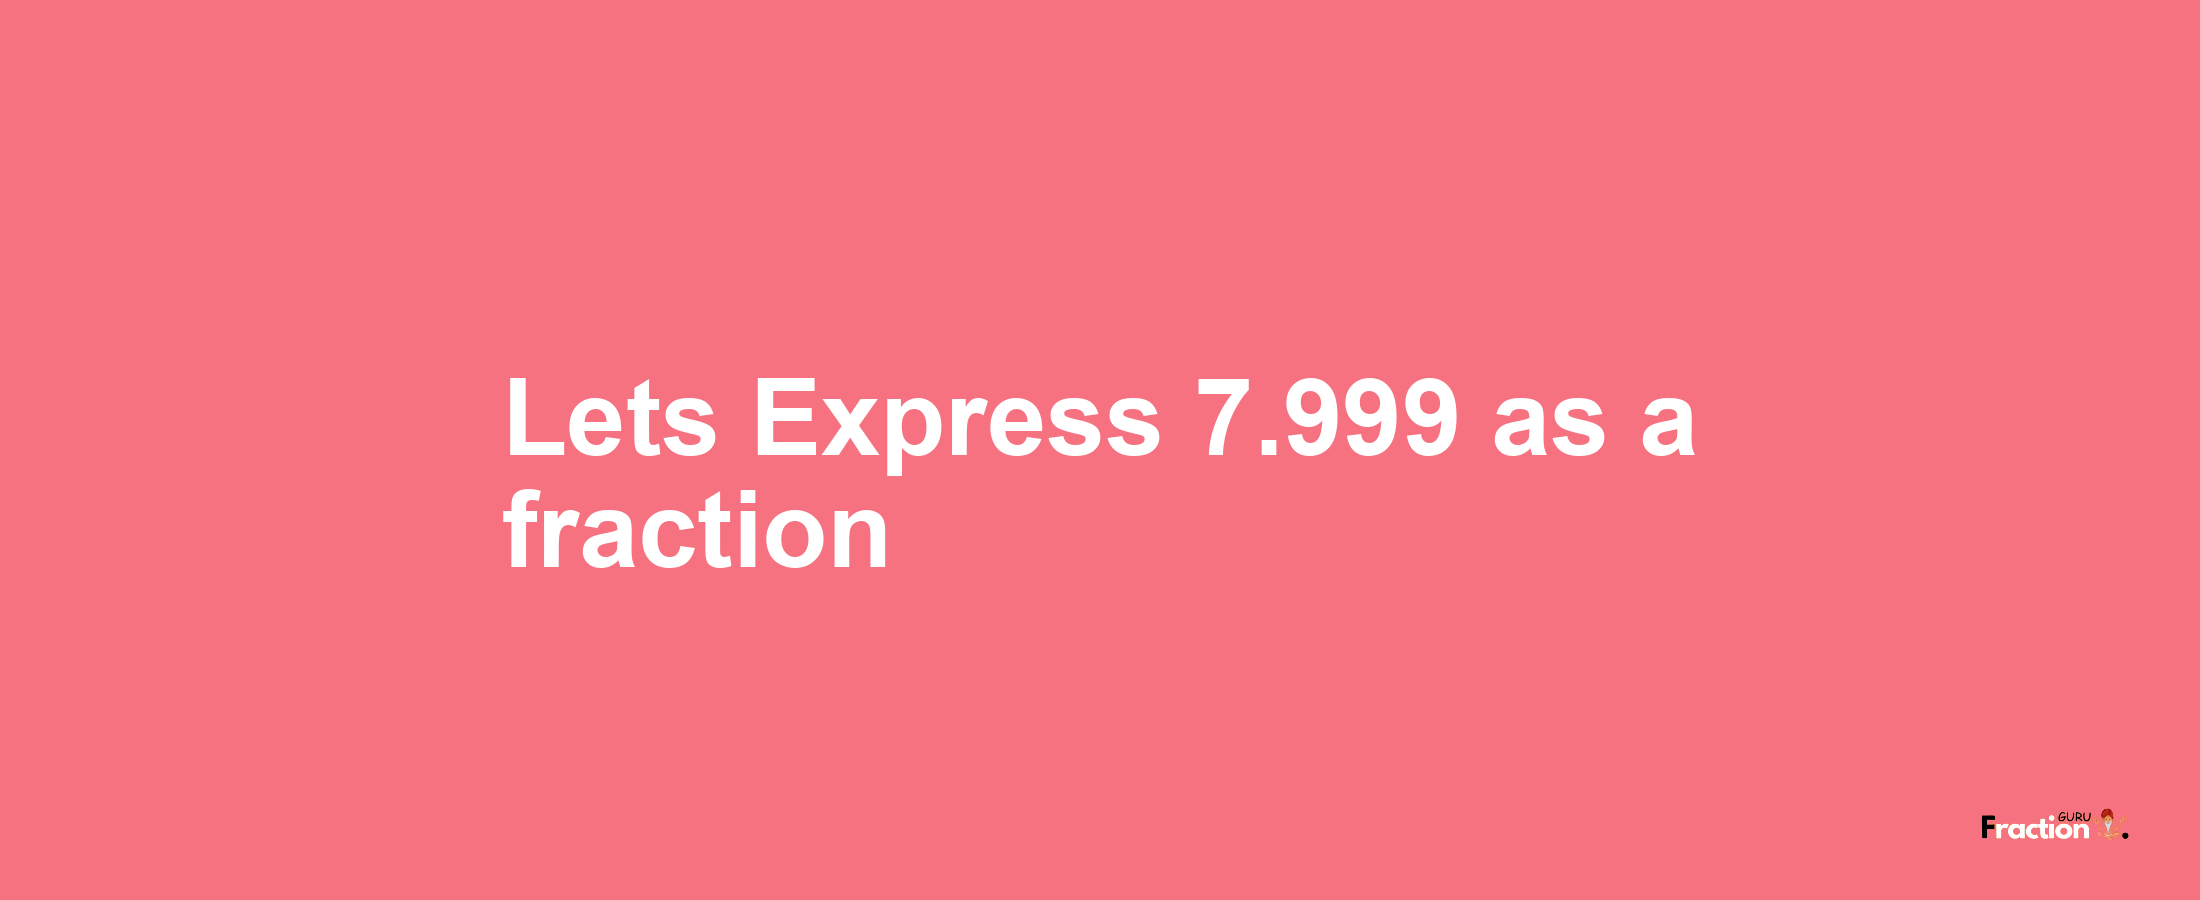 Lets Express 7.999 as afraction